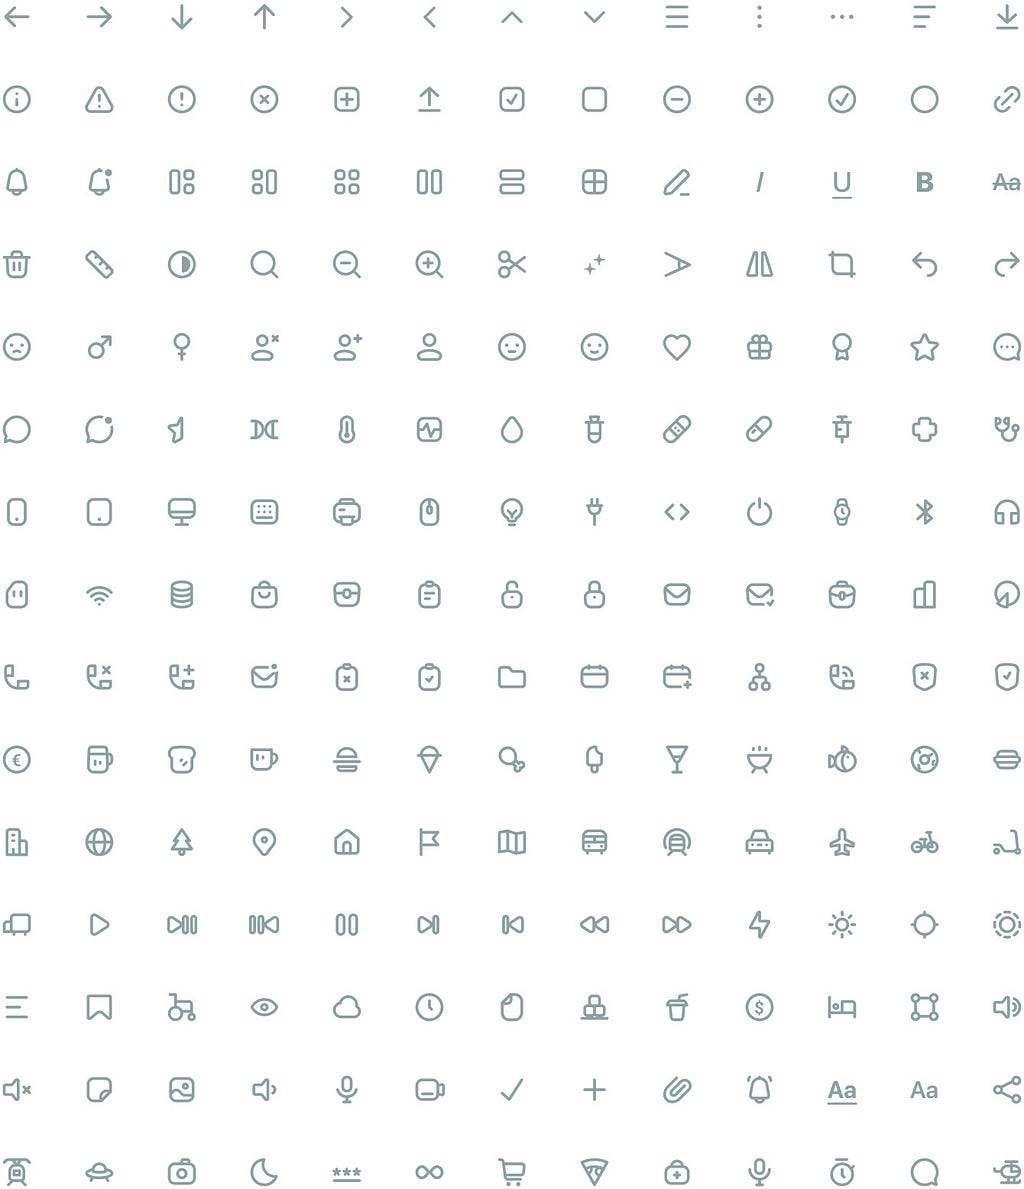 Growing set of more than 200 icons designed in Figma